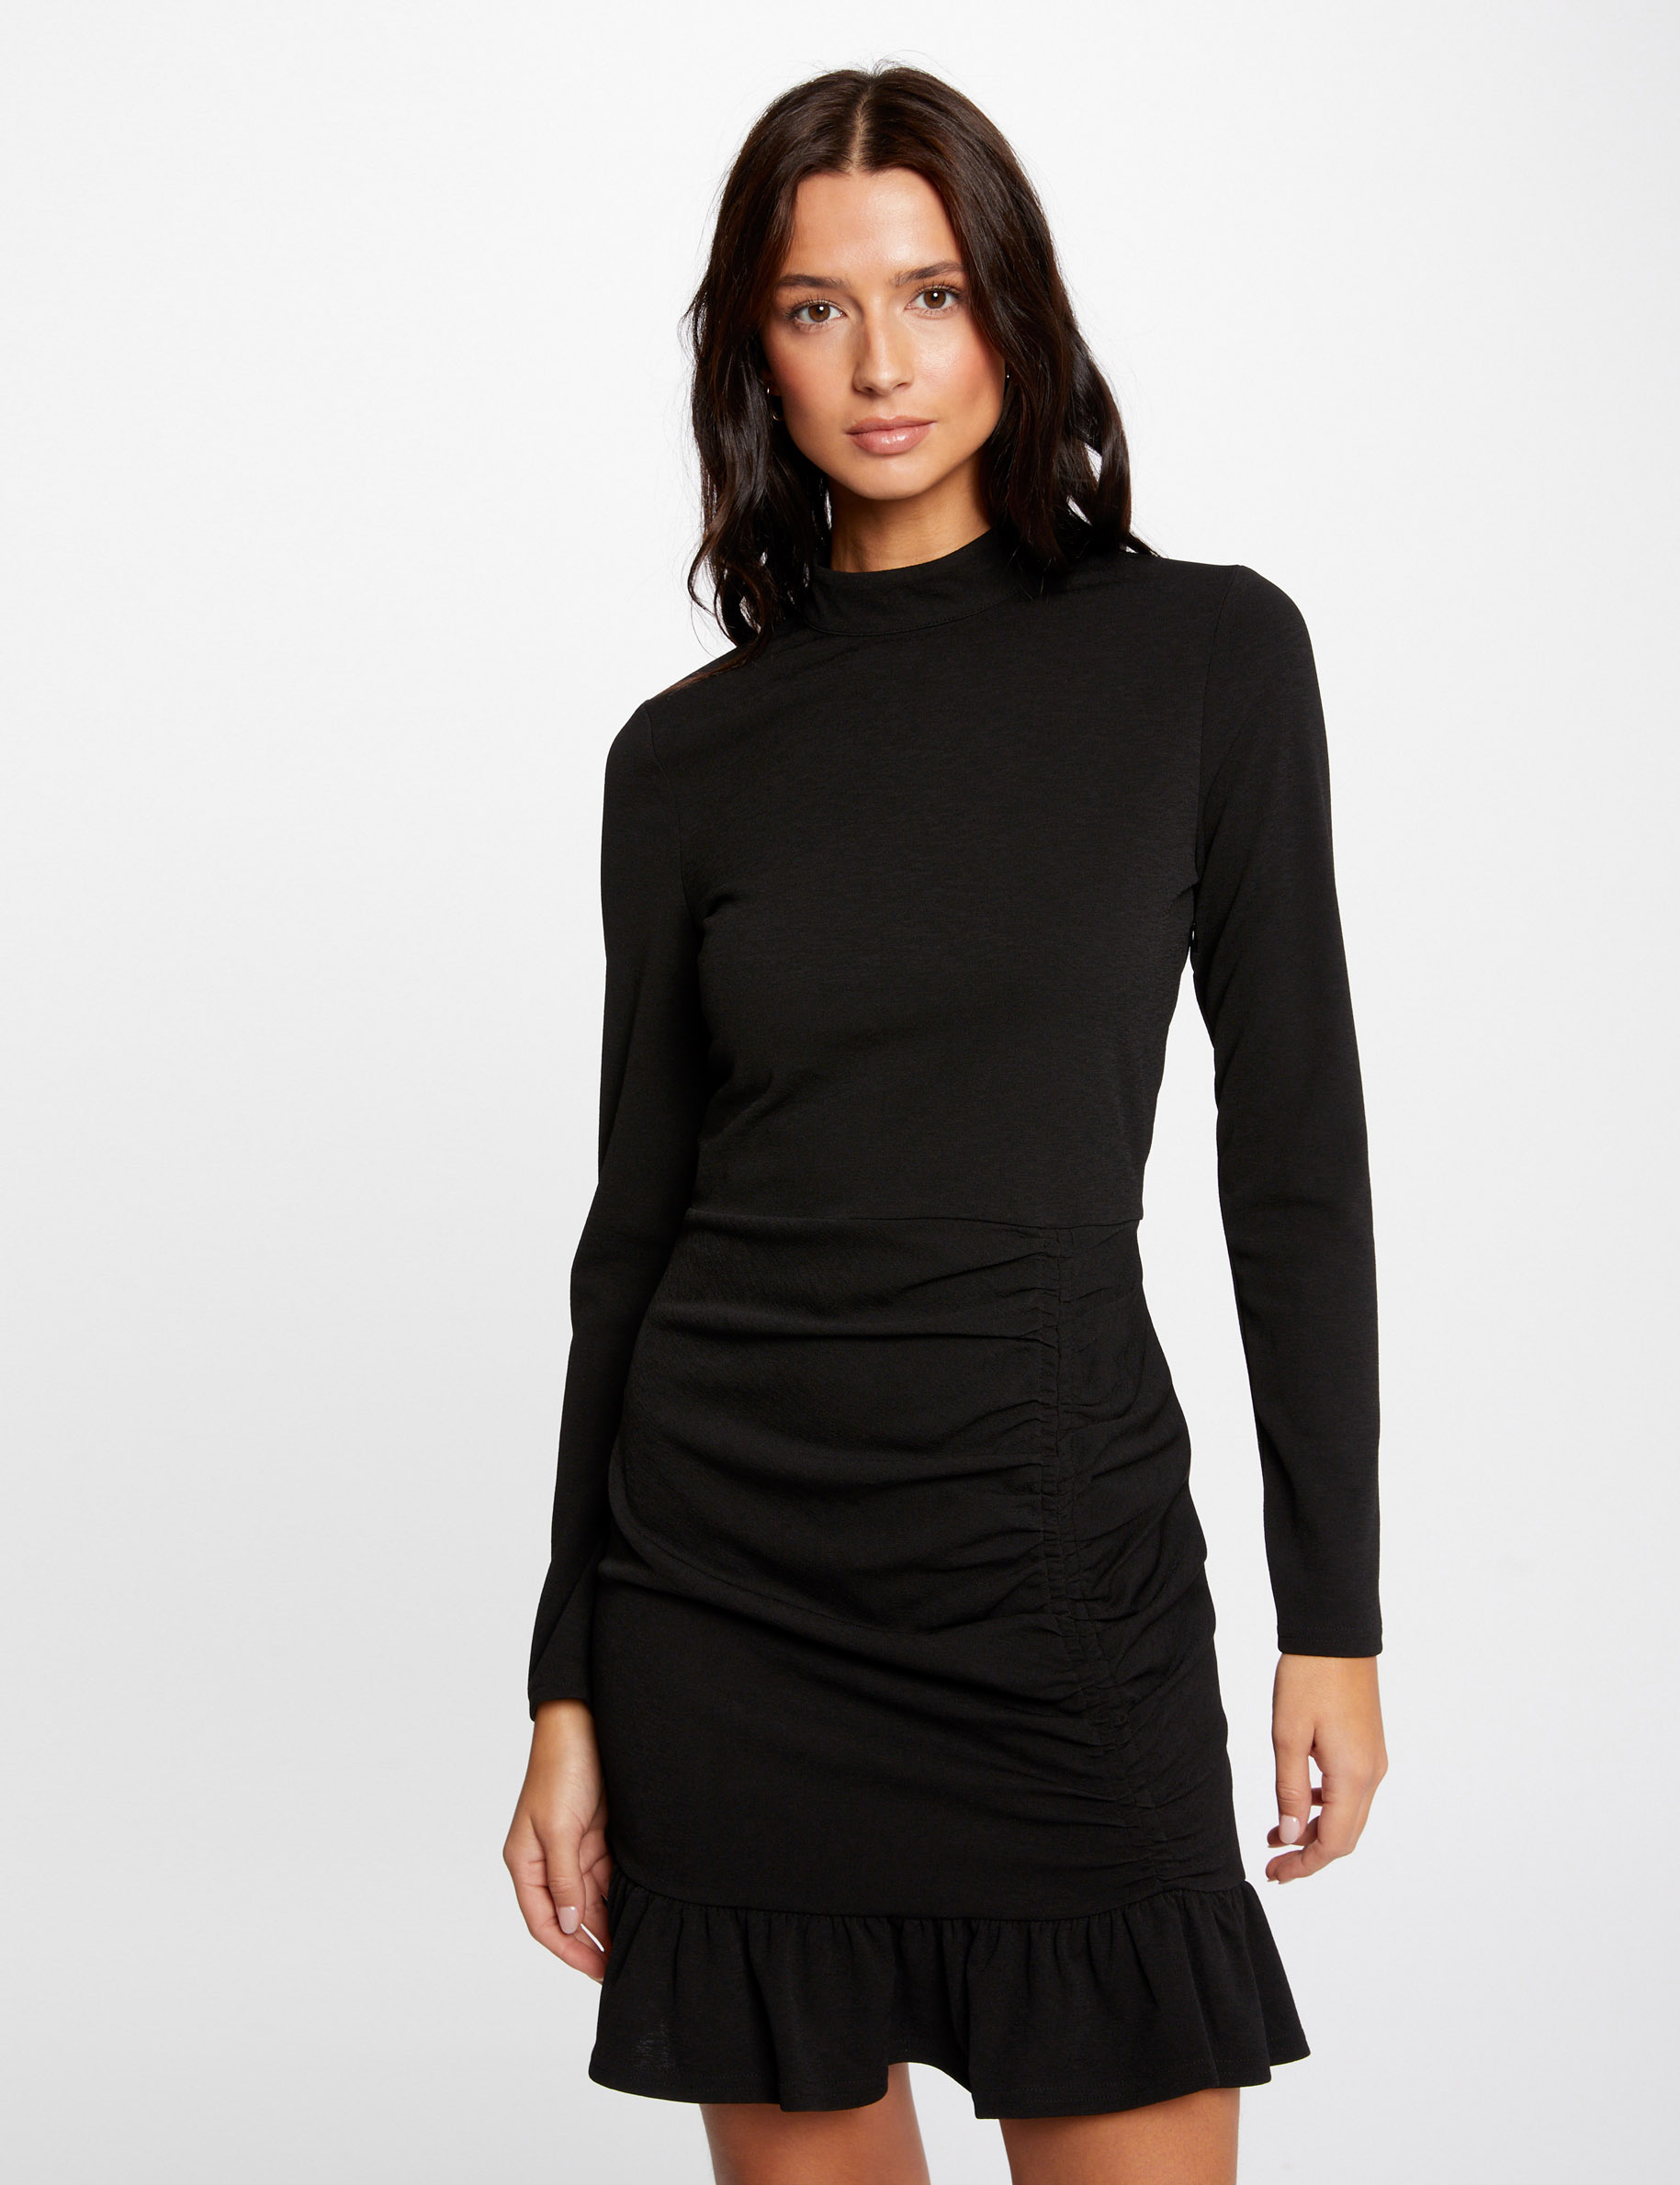 Fitted dress ruffles and high collar black ladies' | Morgan